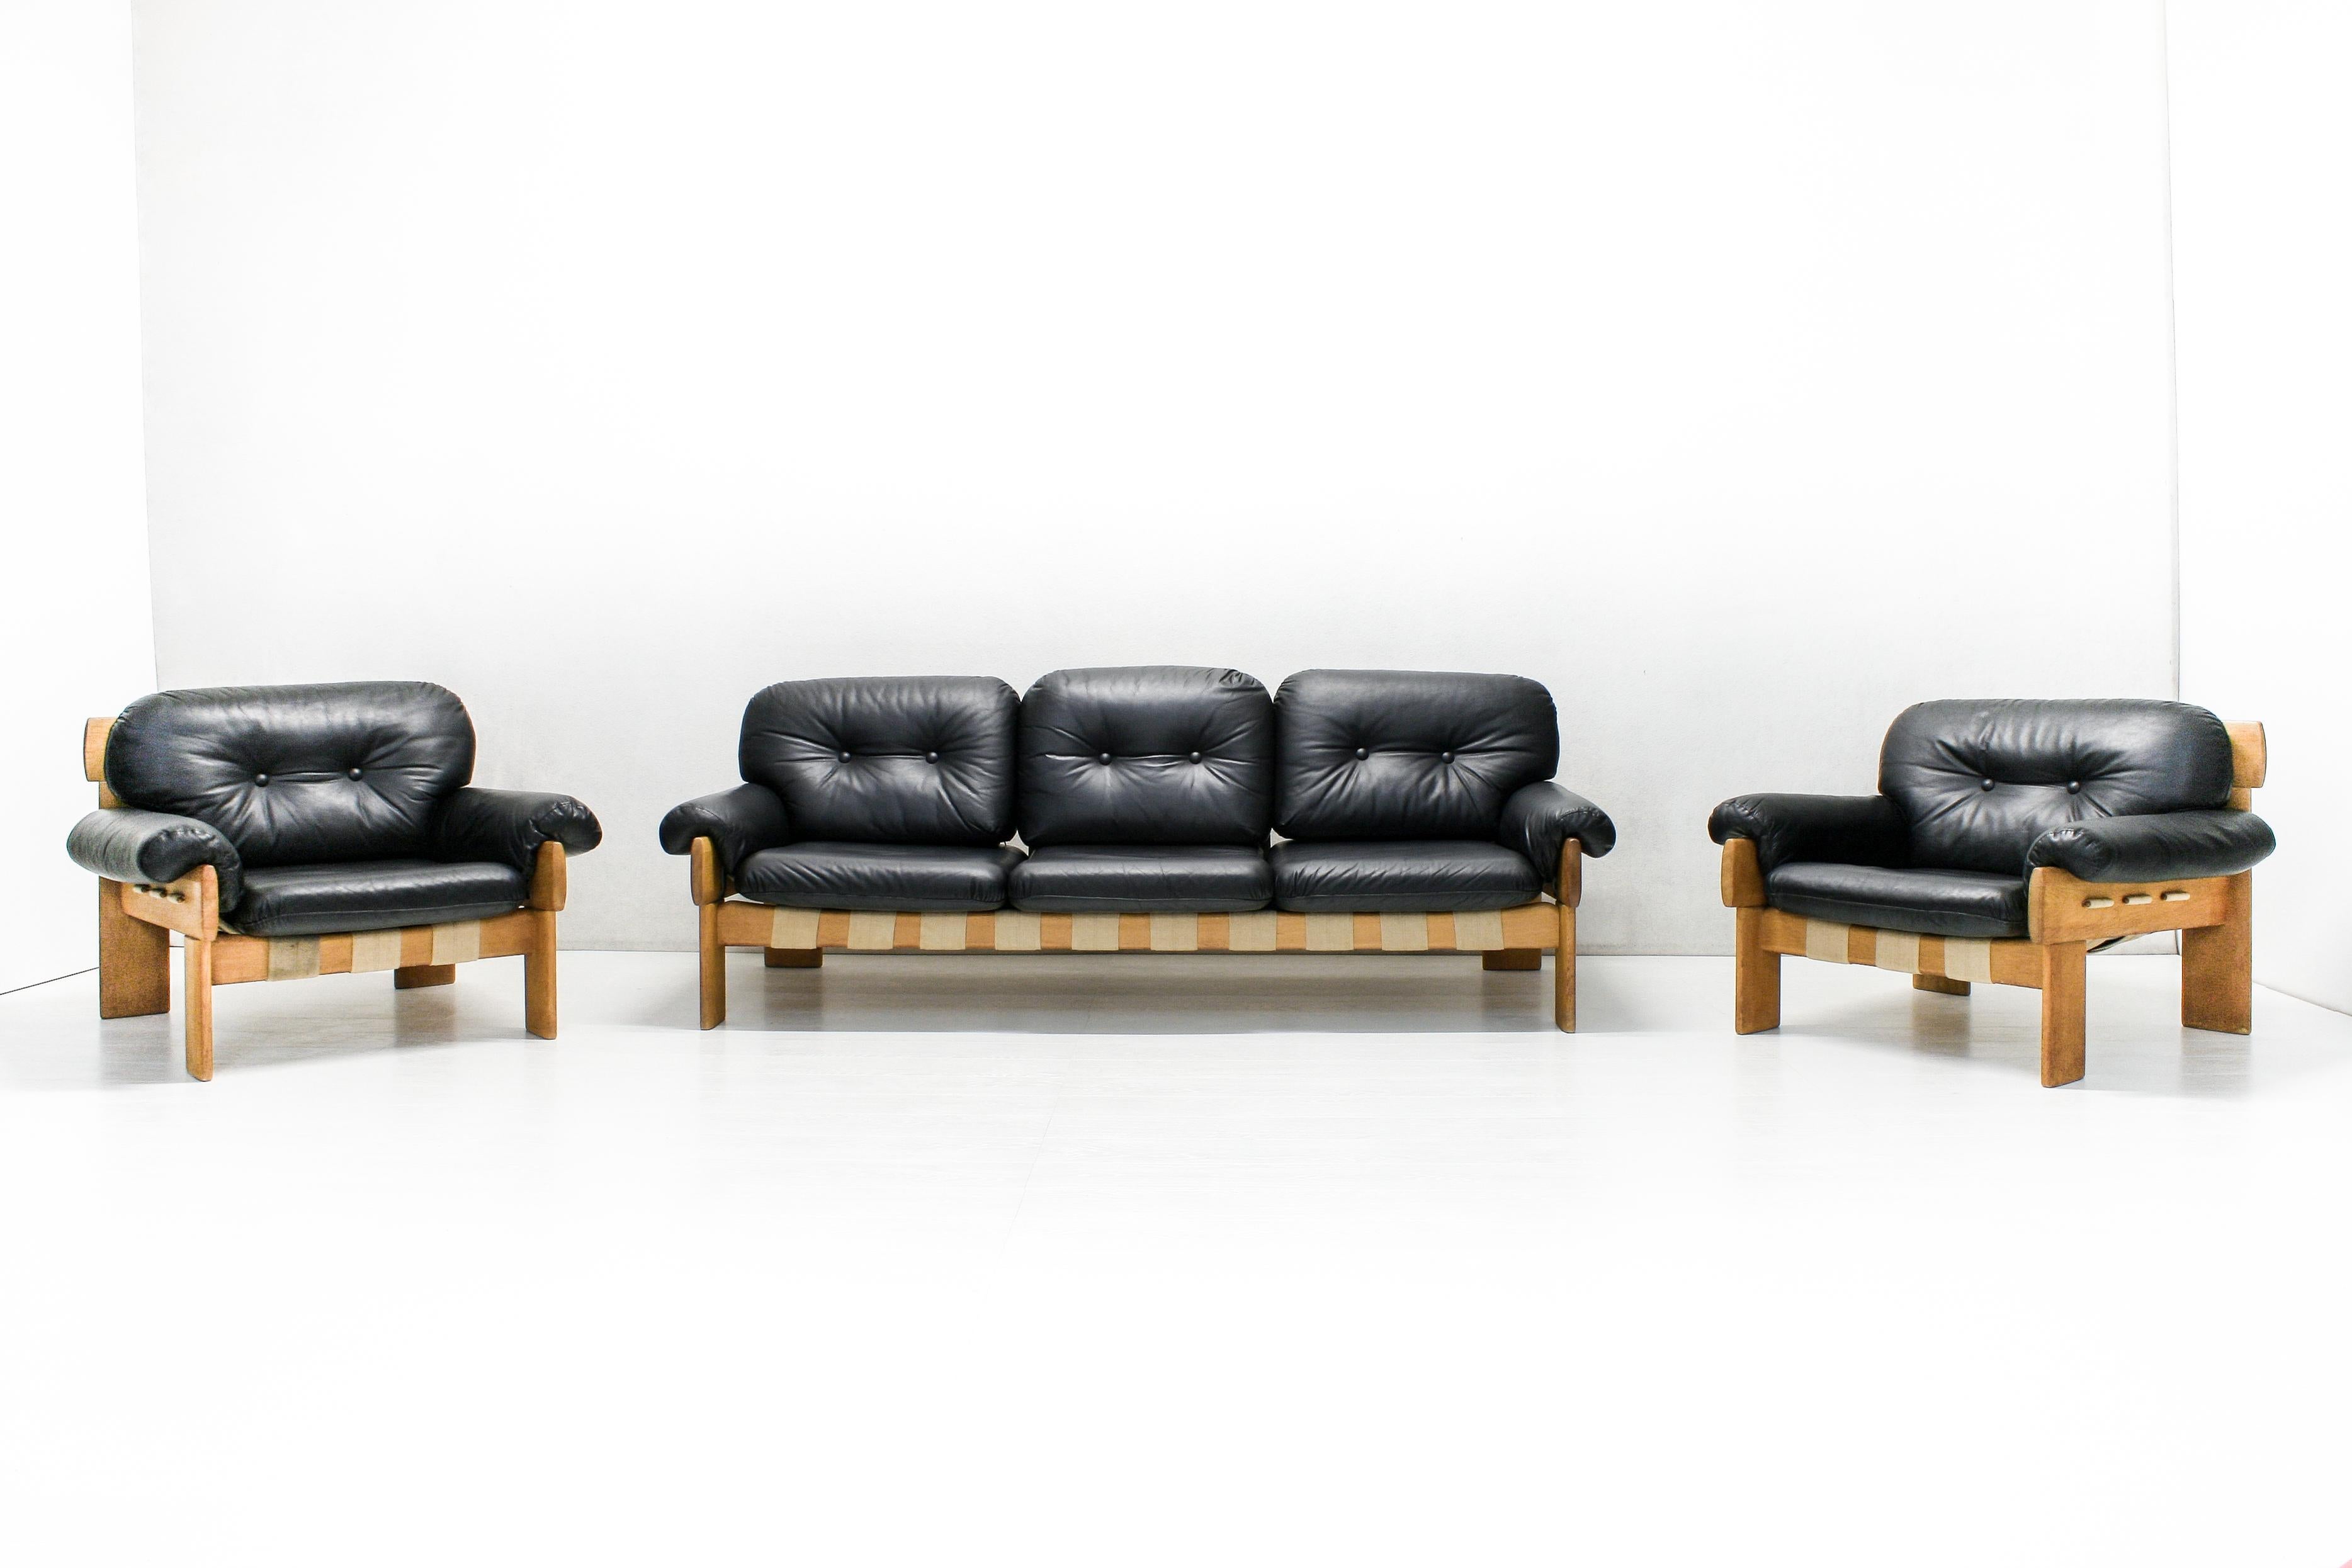 This living room set by Esko Pajamies for Asko, Finland was produced in the 1970s. A brutalist style oak frame with burlap straps embrace the soft black leather firm foam filled cushions.

The sofa measures 205 x 85 cm and the armchairs 80 x 85 cm.